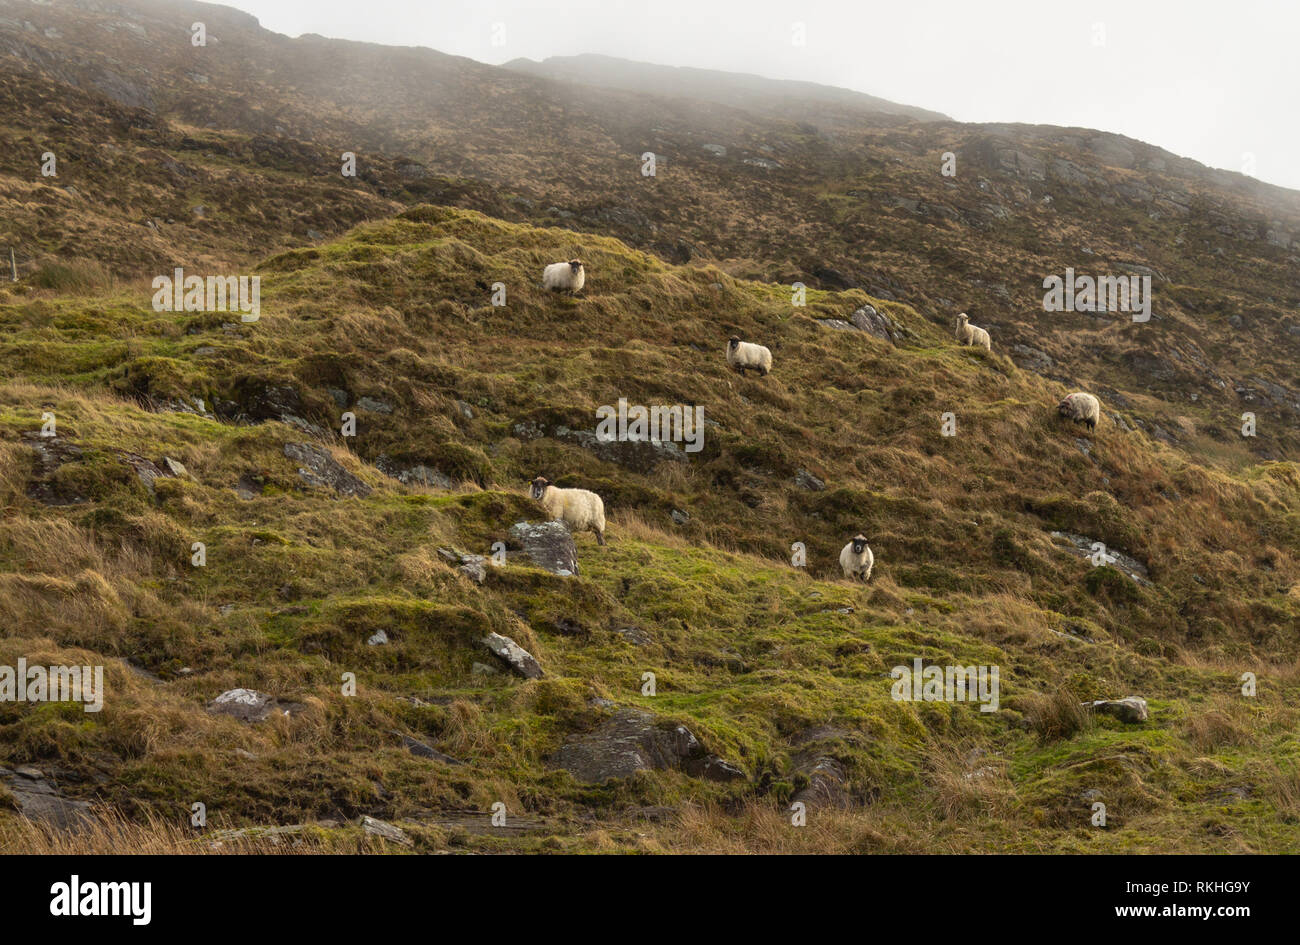 Mixed breed ewes or sheep on a mountain side in Ireland. Stock Photo